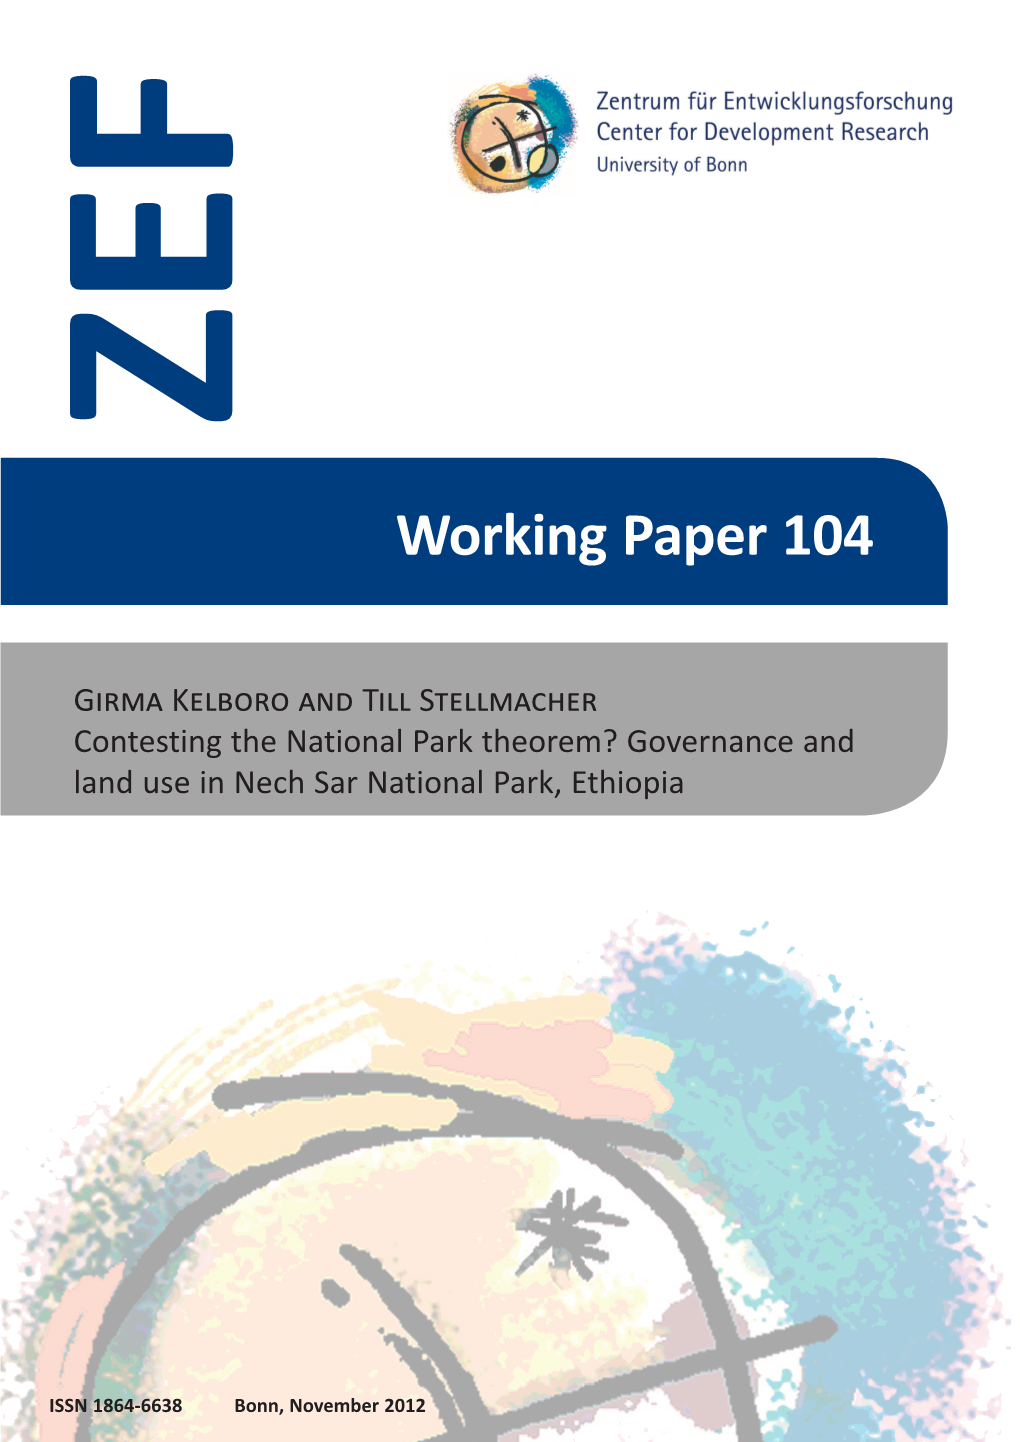 Working Paper 104